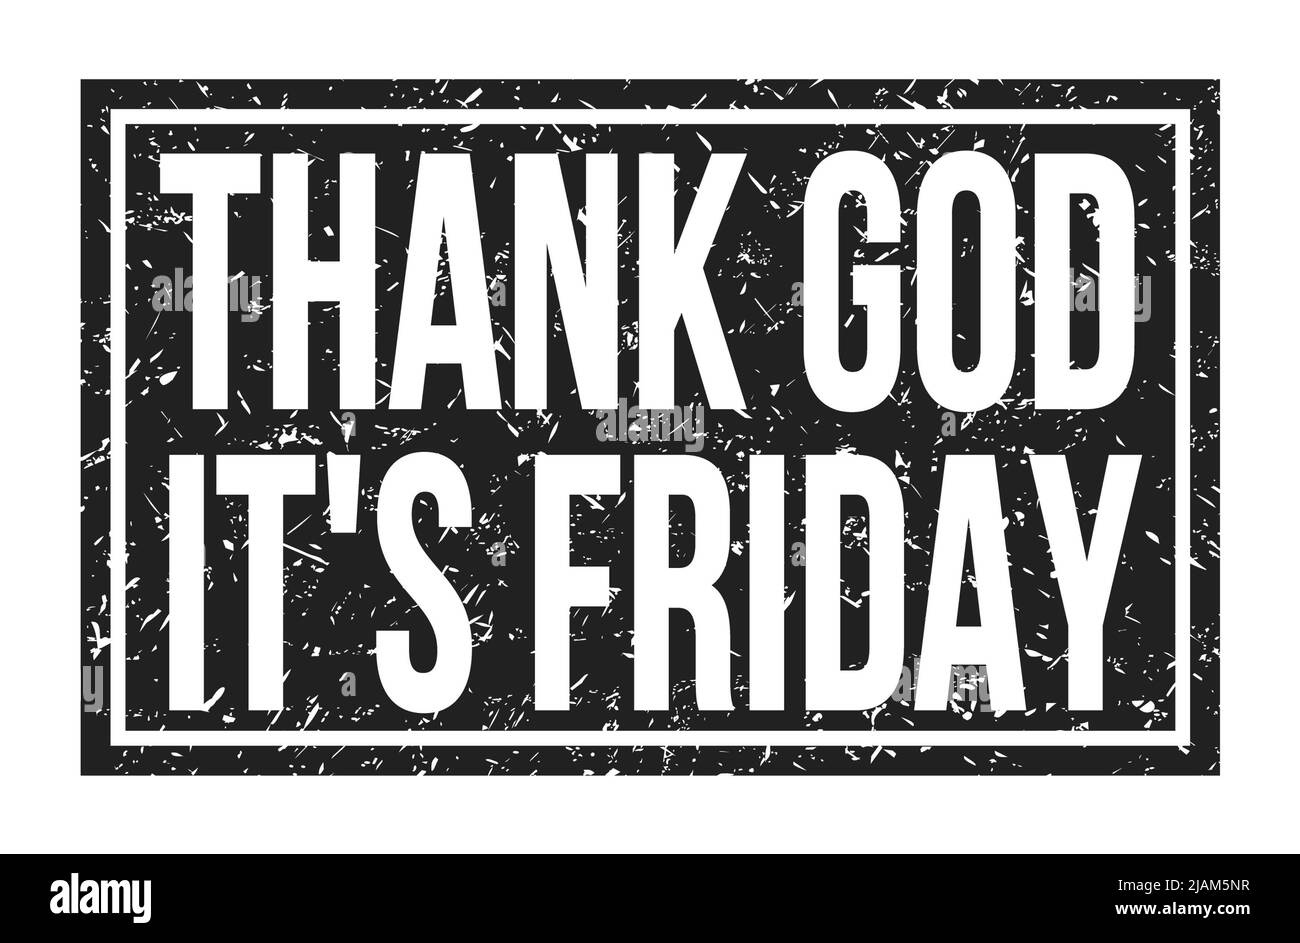 THANK GOD IT'S FRIDAY, words written on black rectangle stamp sign Stock Photo